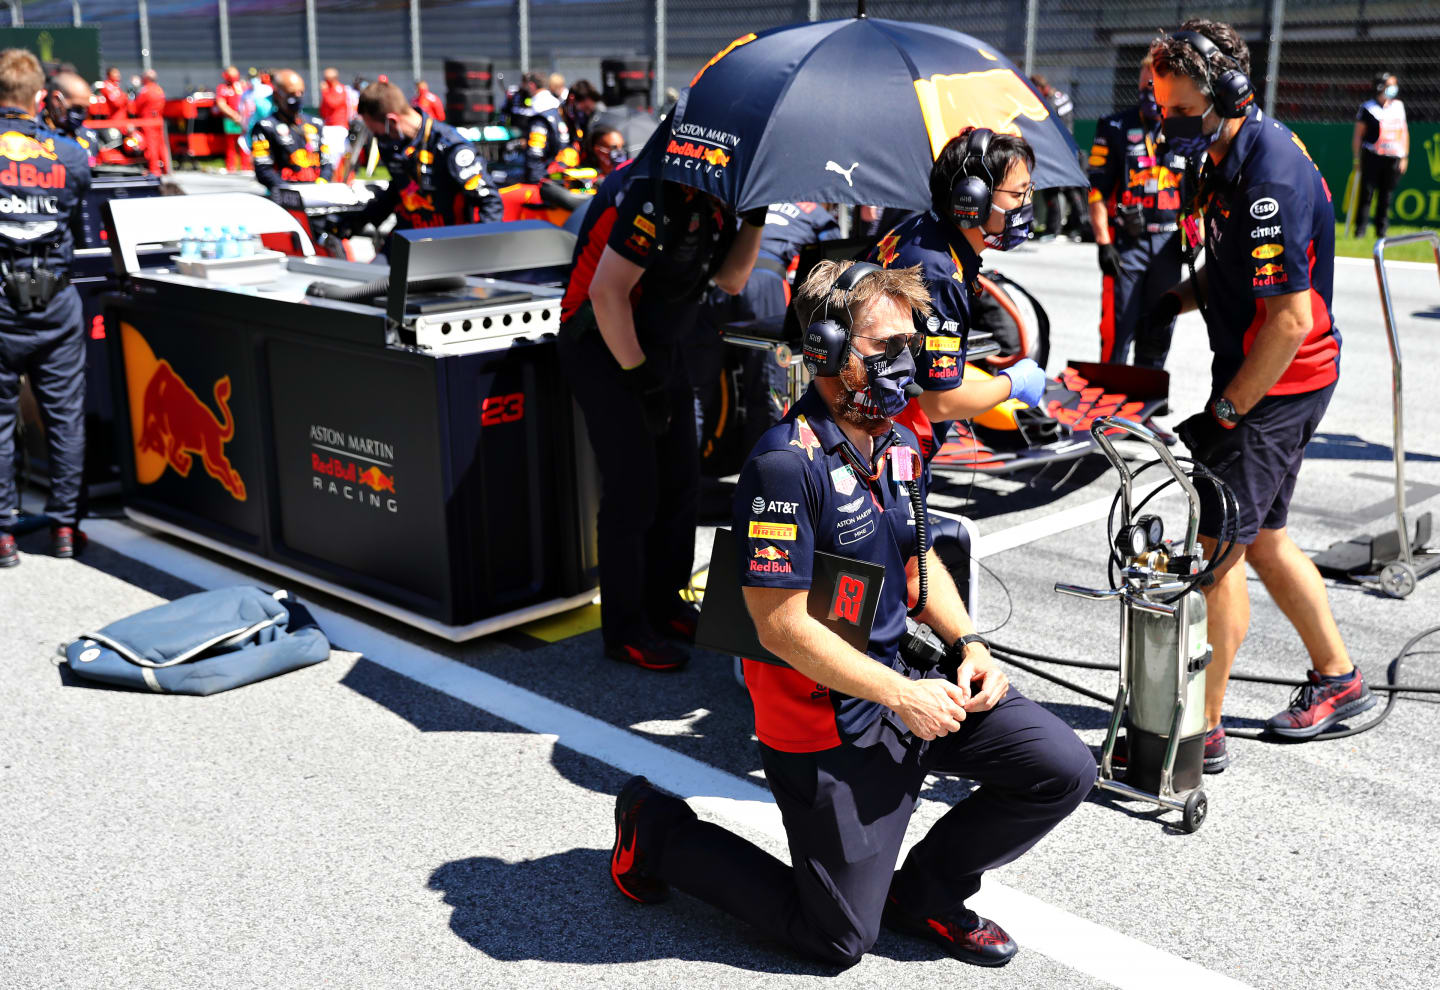 SPIELBERG, AUSTRIA - JULY 05: Red Bull Racing race engineer Mike Lugg takes a knee in support of